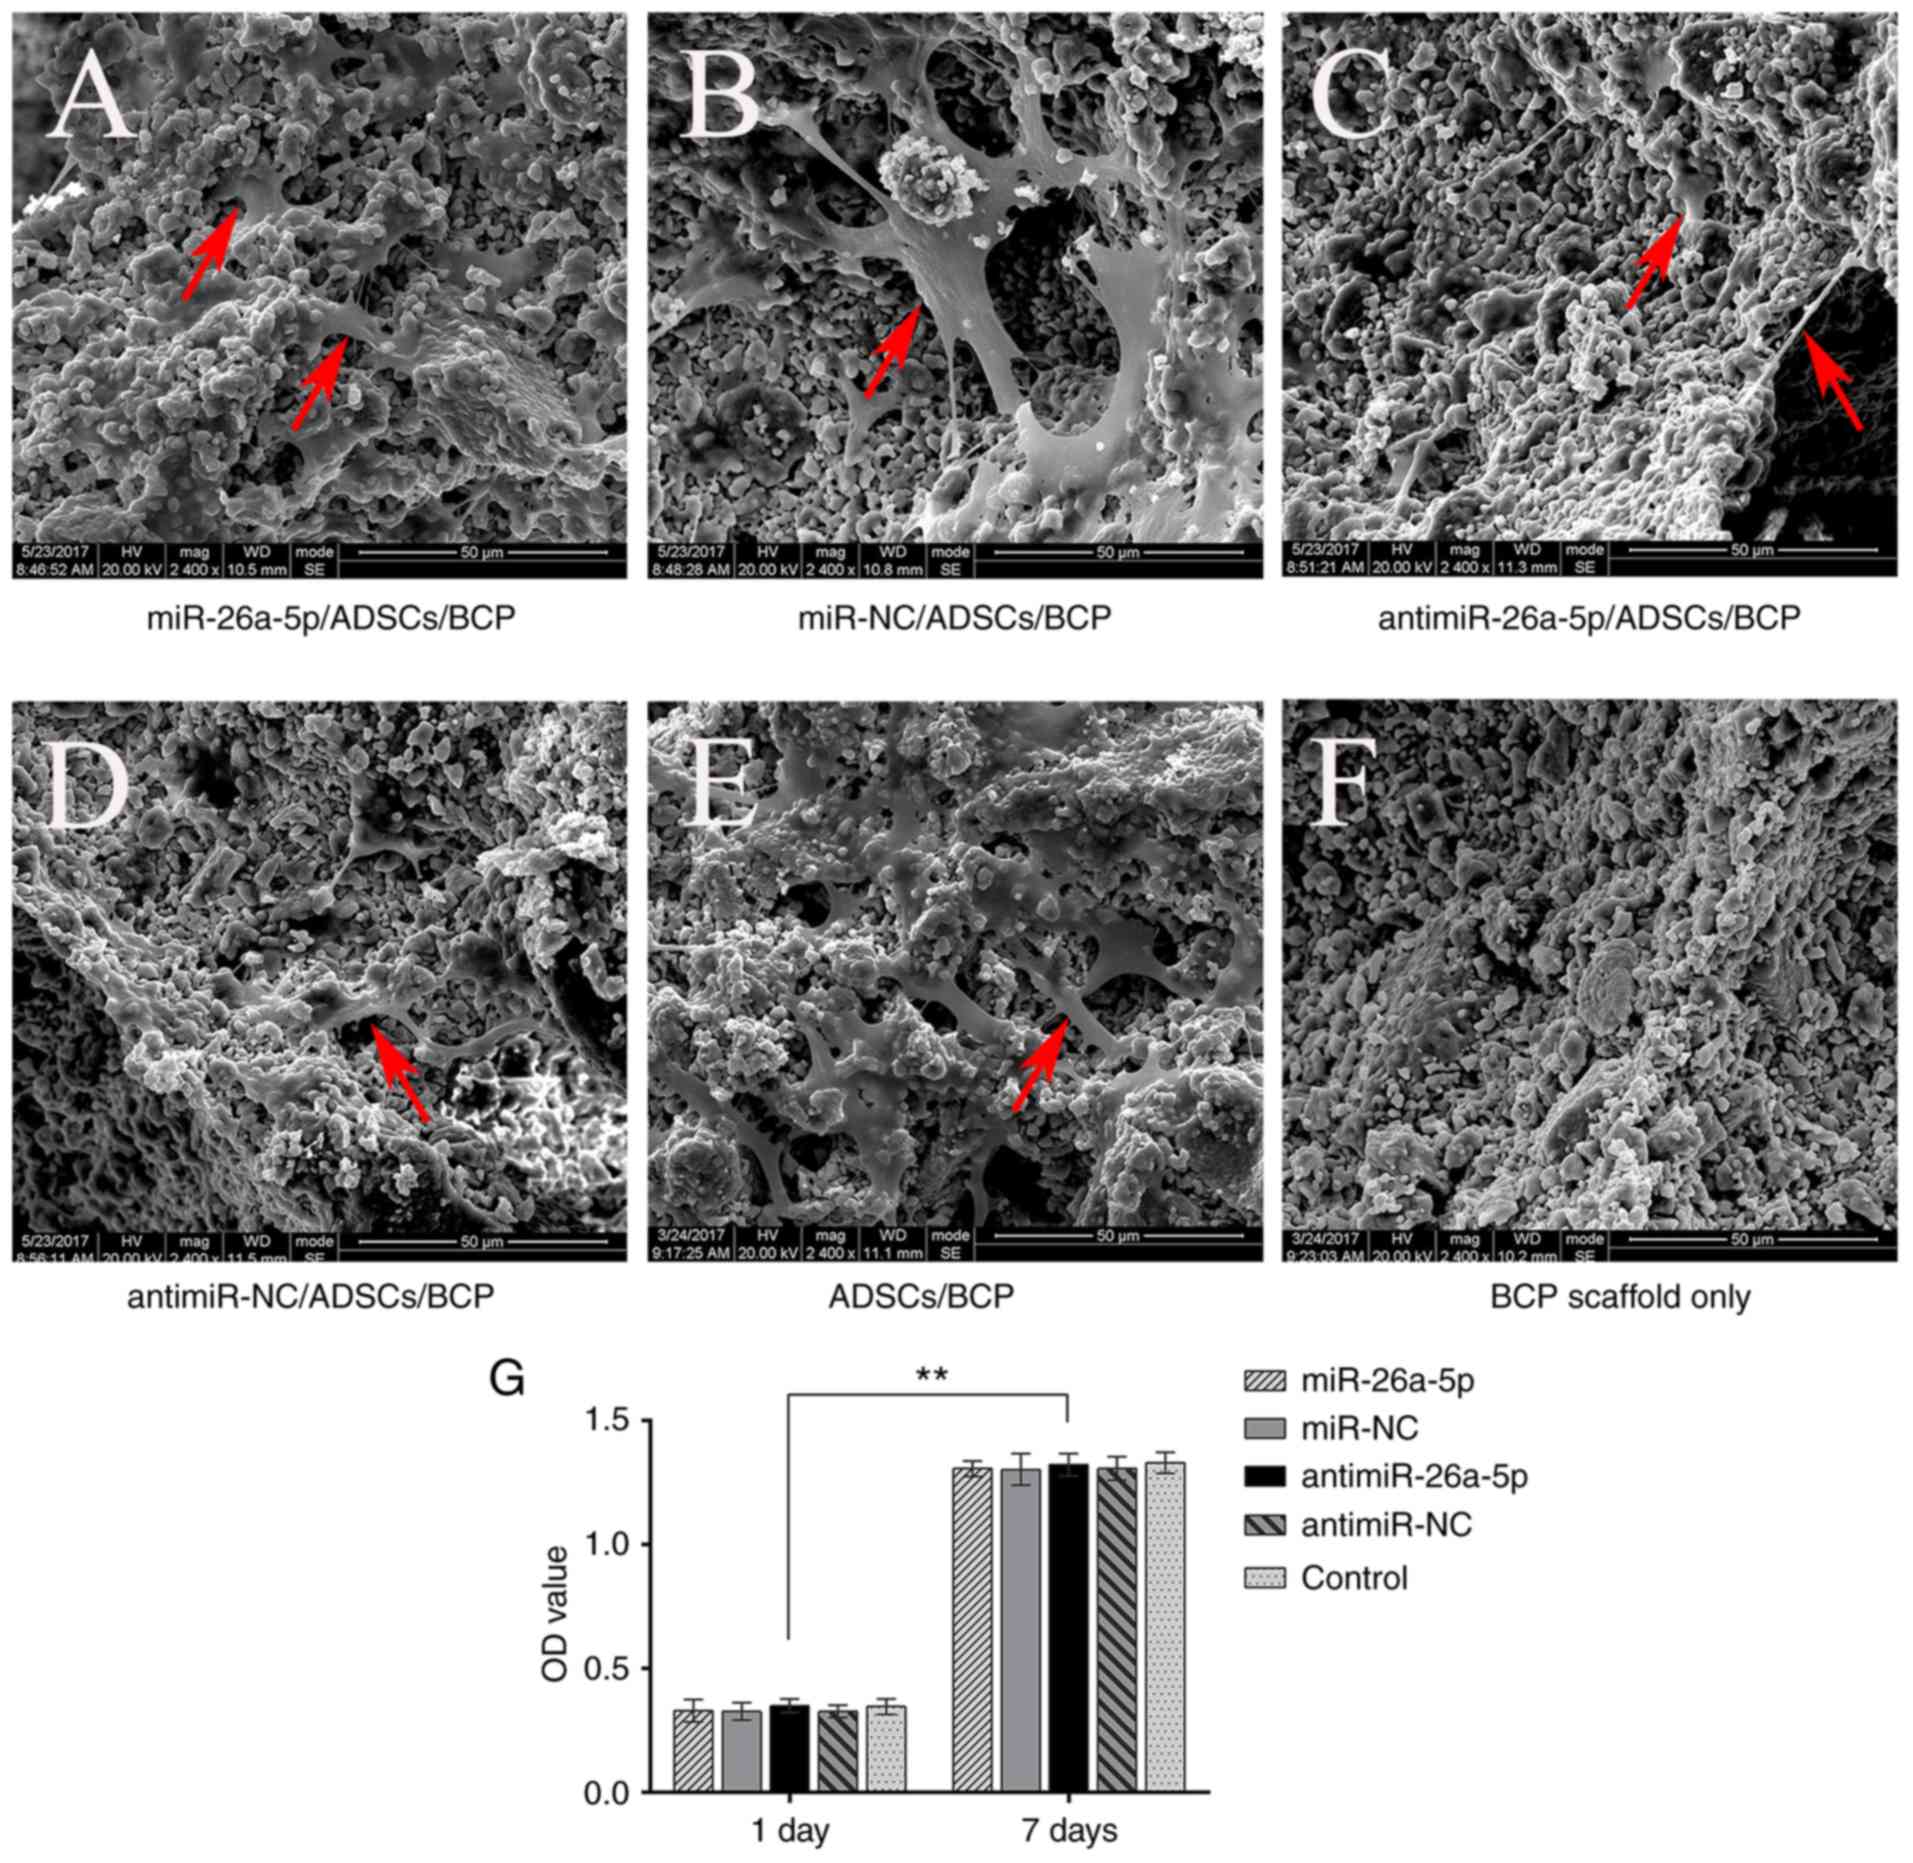 The Role Of Antimir 26a 5p Biphasic Calcium Phosphate In Repairing Rat Femoral Defects